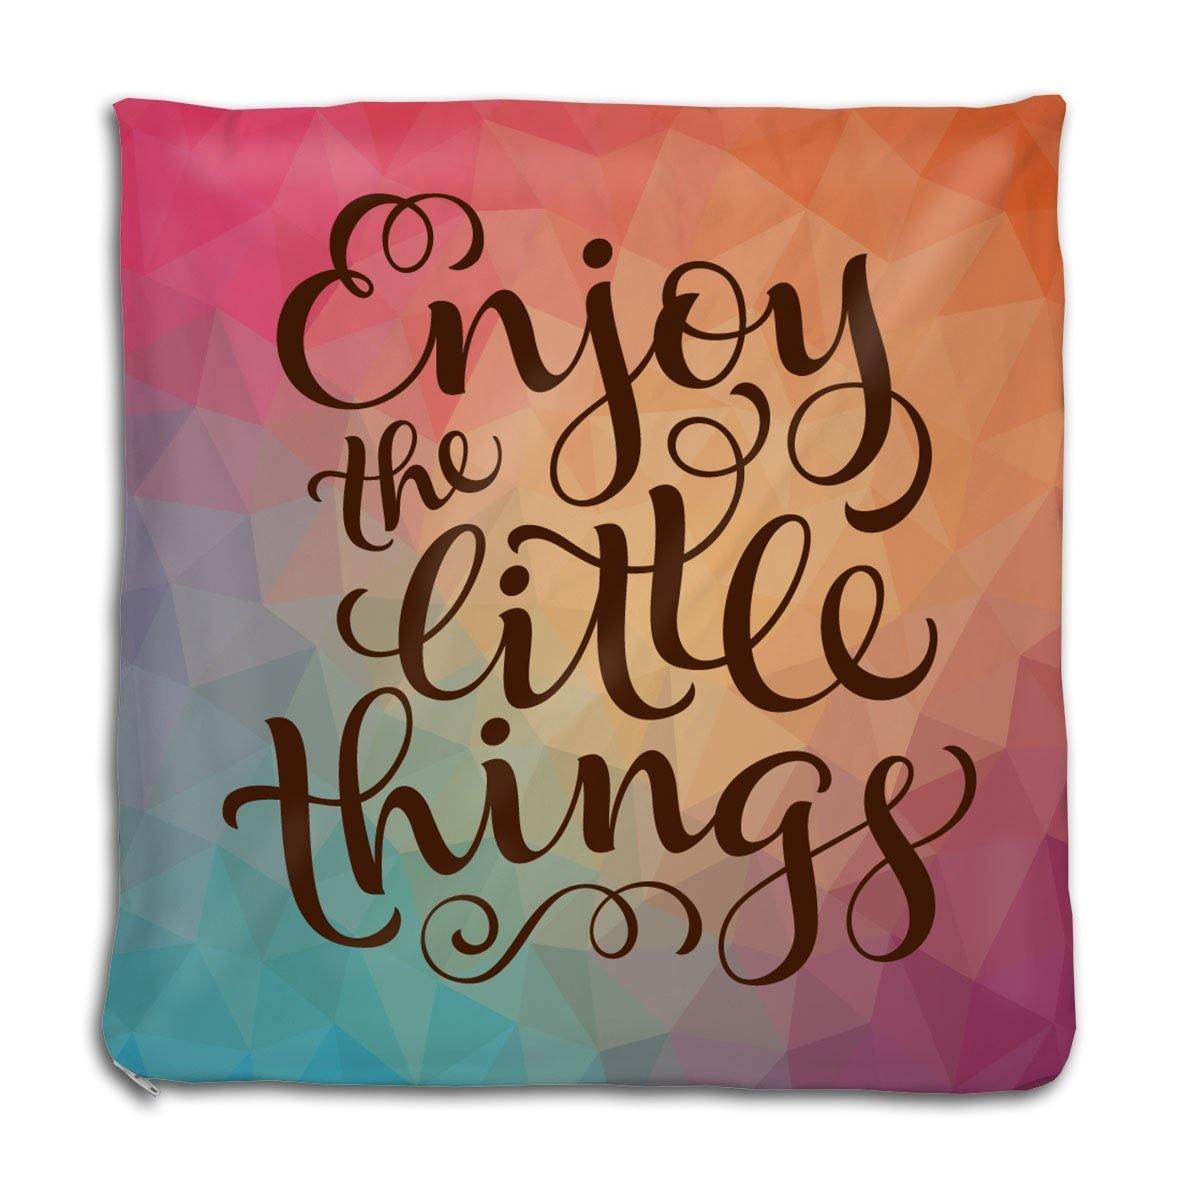 The Little Things Pillow Cover